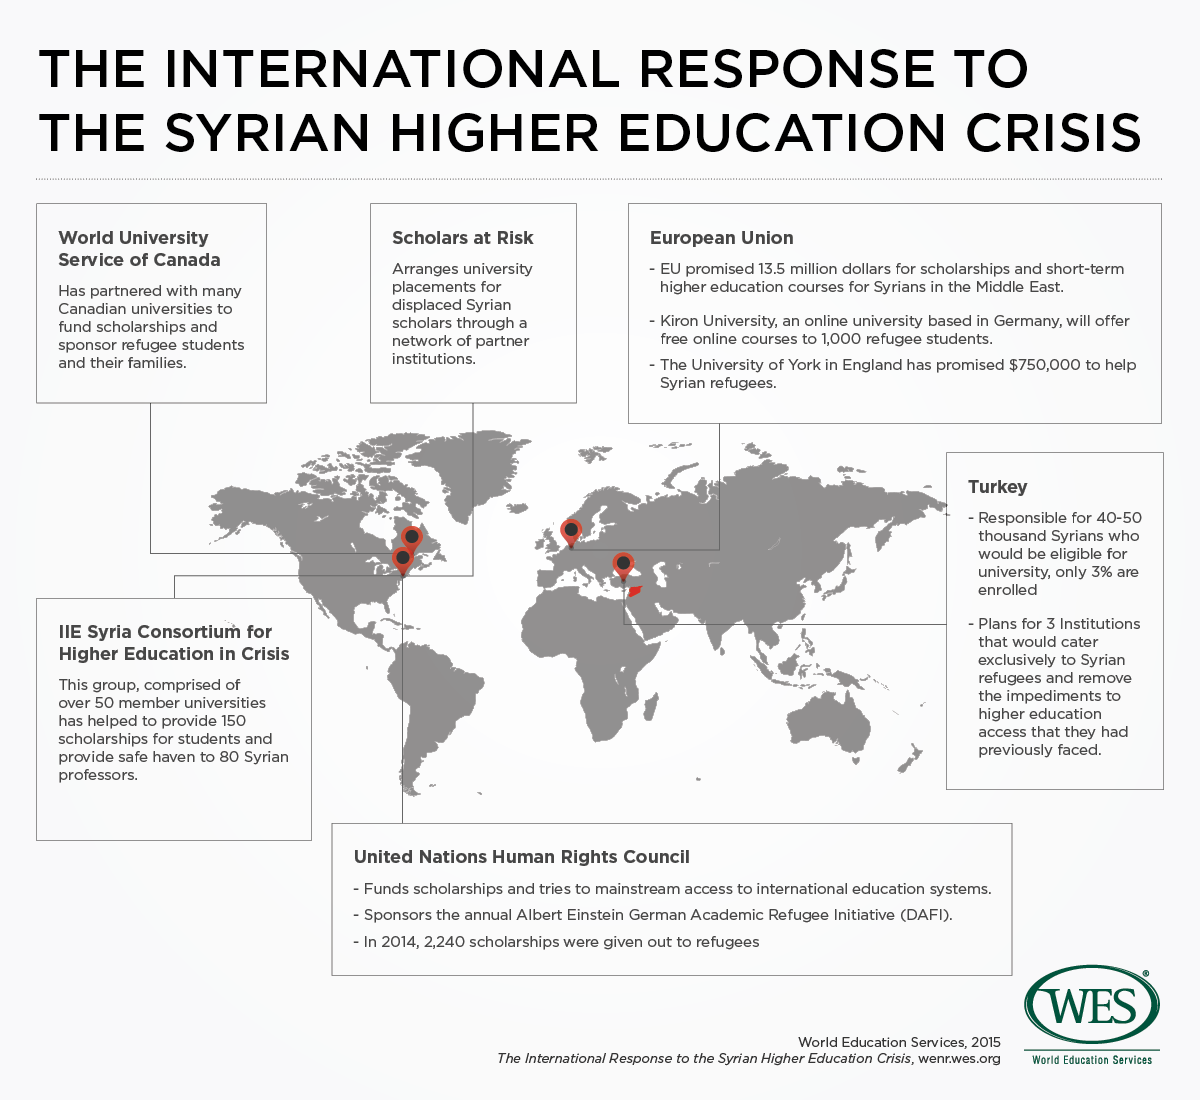 An infographic showing how various governmental and non-governmental organizations around the world have responded to the Syrian higher education crisis